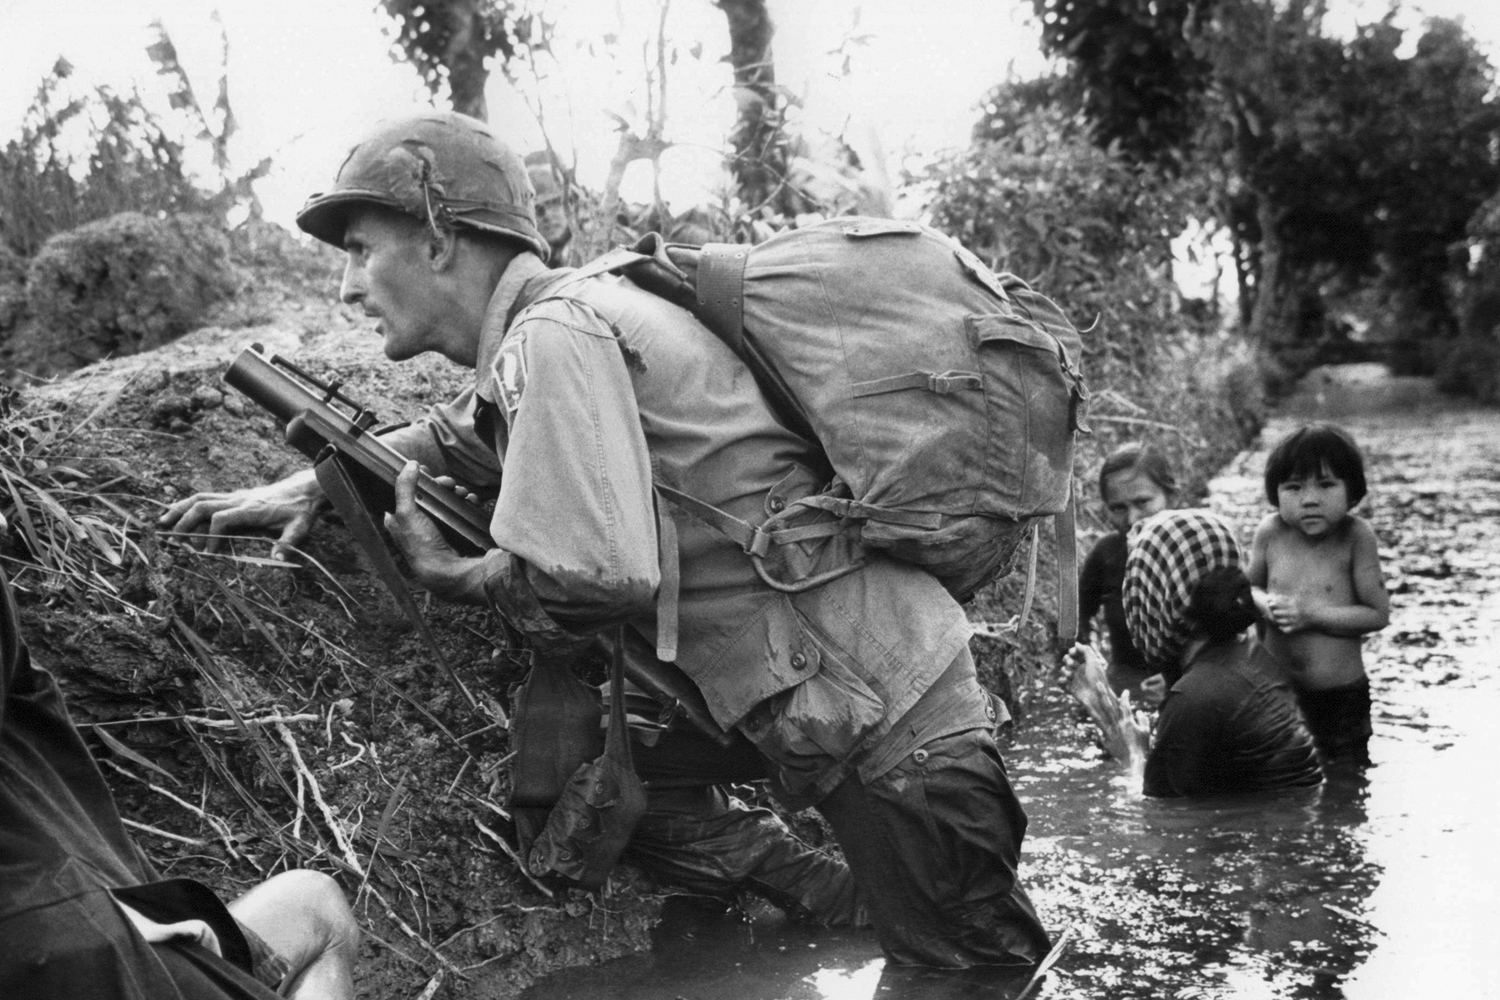 In this Jan. 1, 1966 file photo, a Paratrooper of the 173rd U.S. Airborne brigade crouches with women and children in a muddy canal as intense Viet Cong sniper fire temporarily pins down his unit during the Vietnamese War near Bao trai in Vietnam. (Horst Faas/AP)